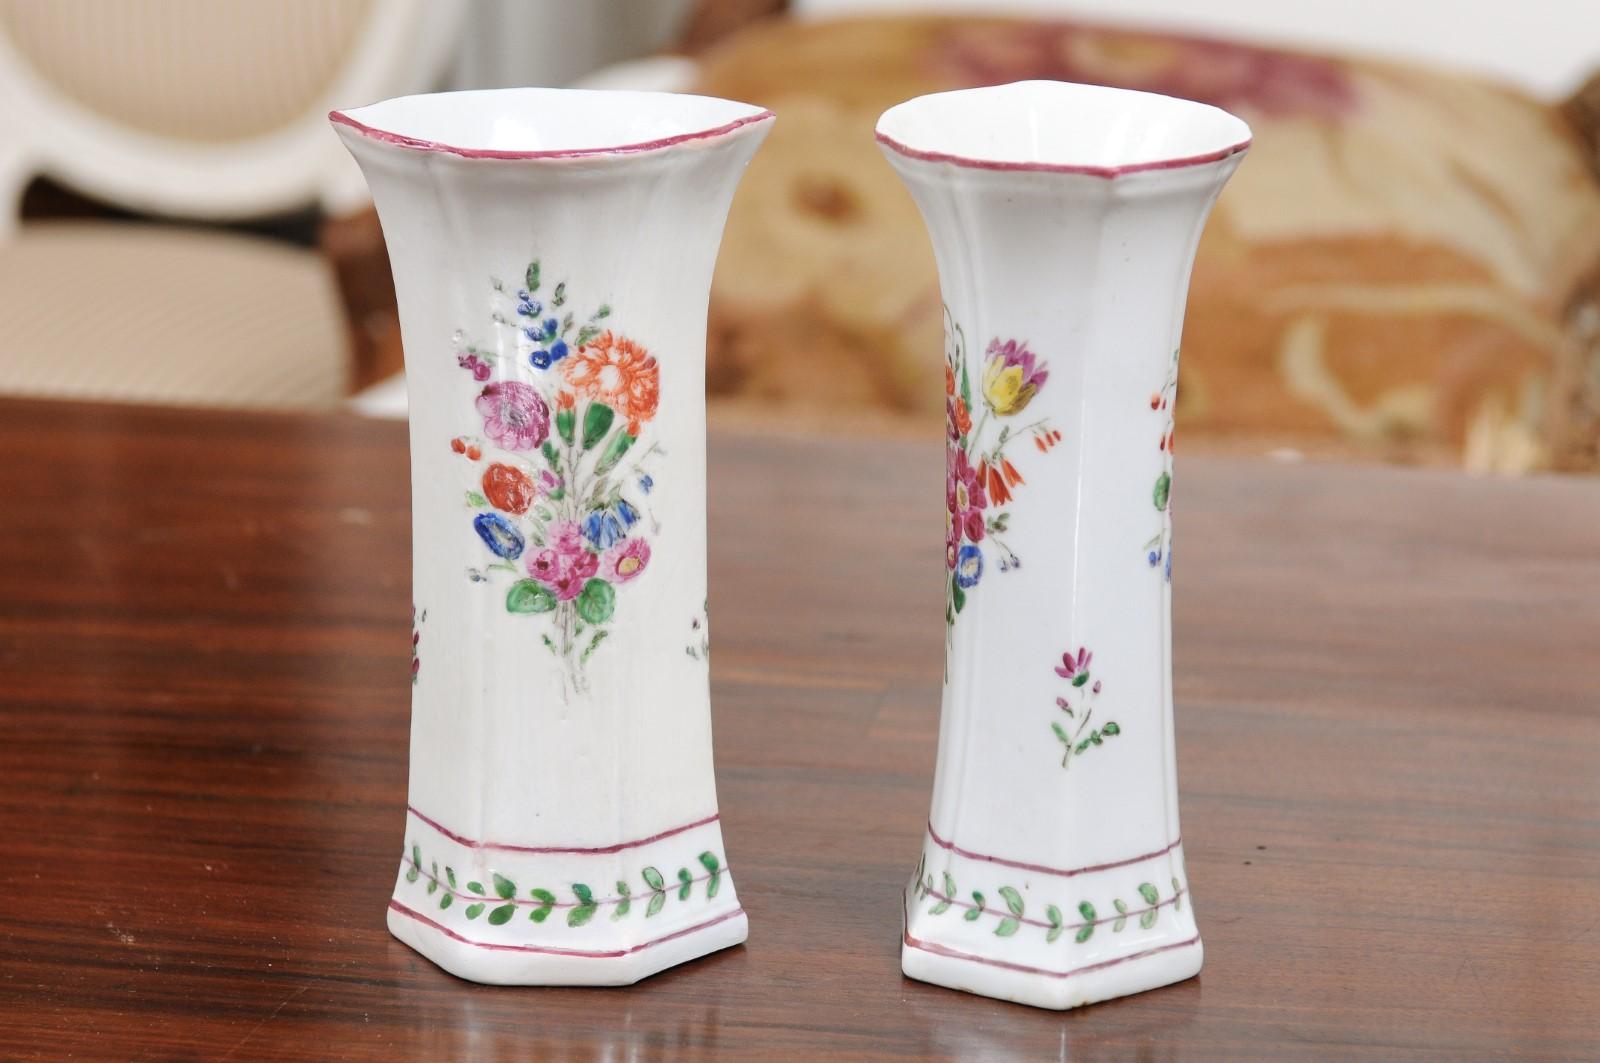 Pair of Italian Porcelain Vases with Colorful Painted Floral Motifs, circa 1805 For Sale 5